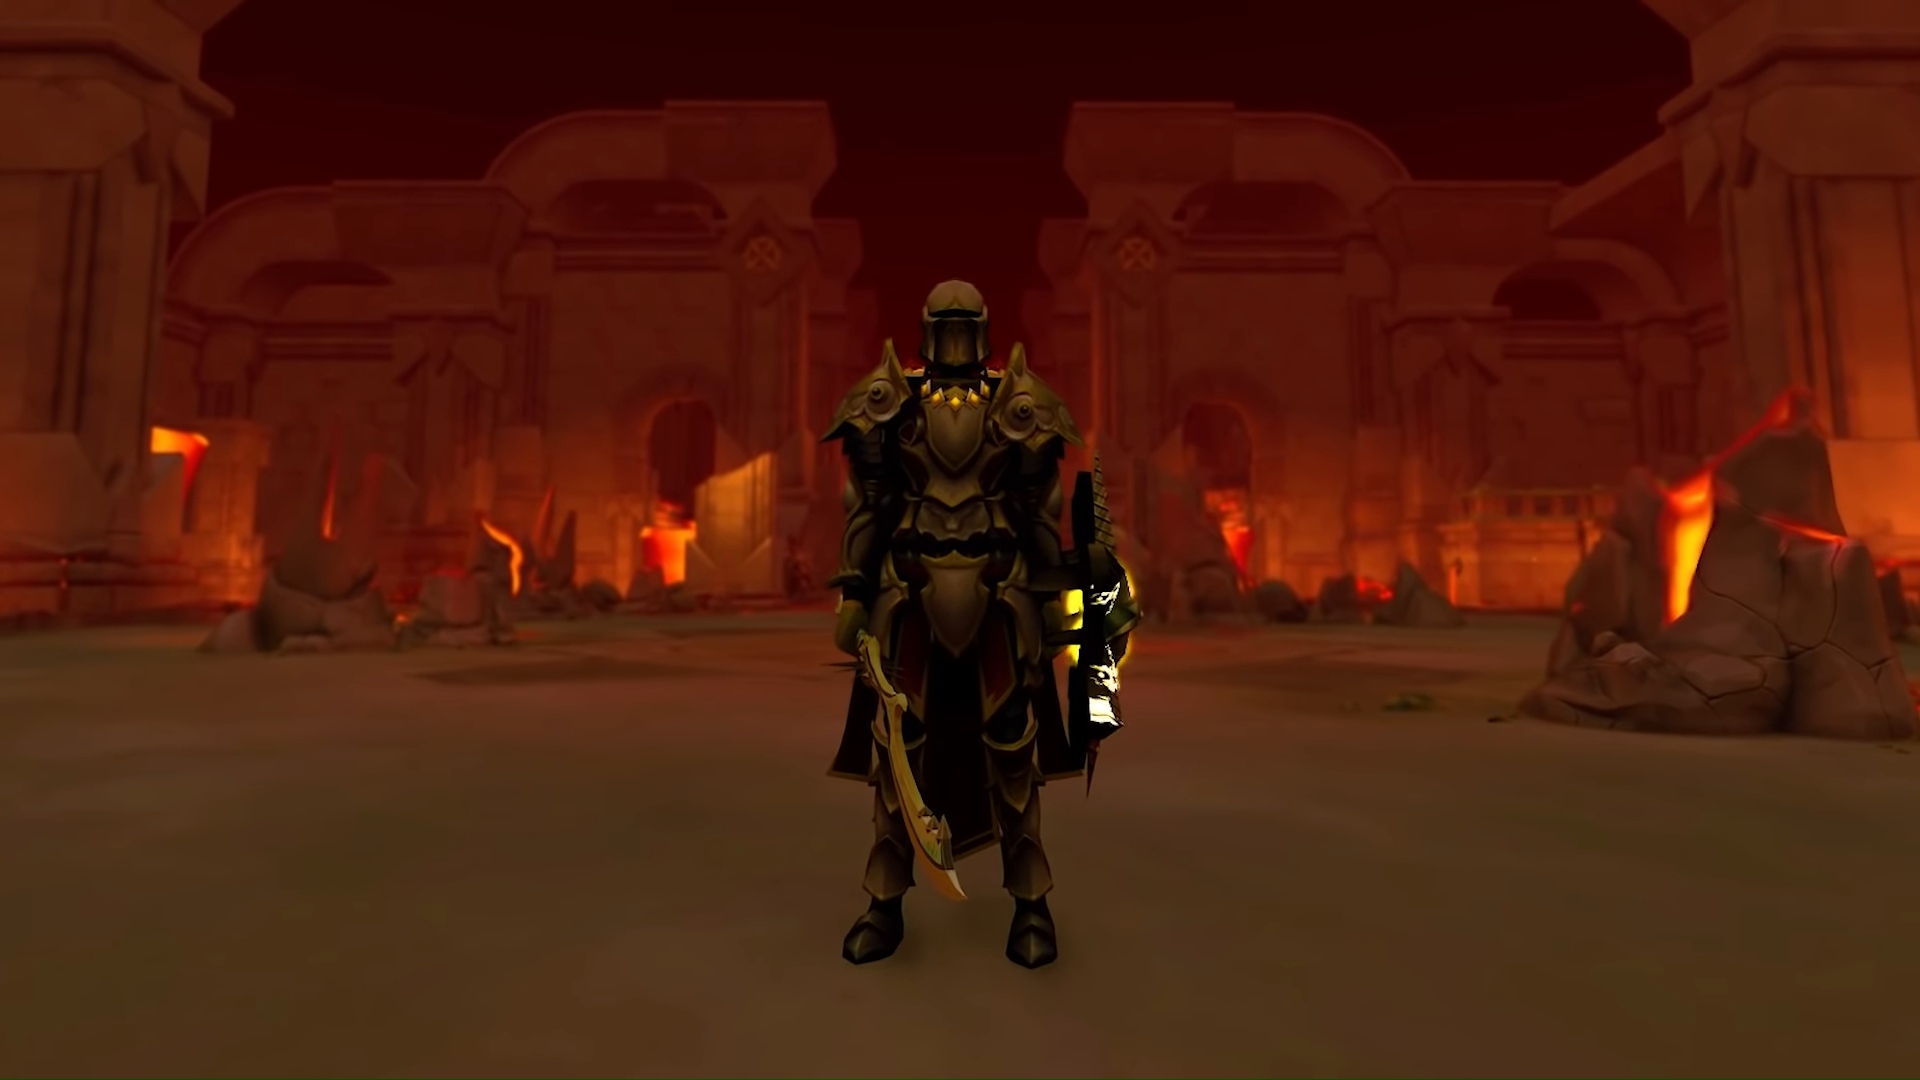 Best PC games on mobile: Runescape. Image shows a figure standing in a dark room.